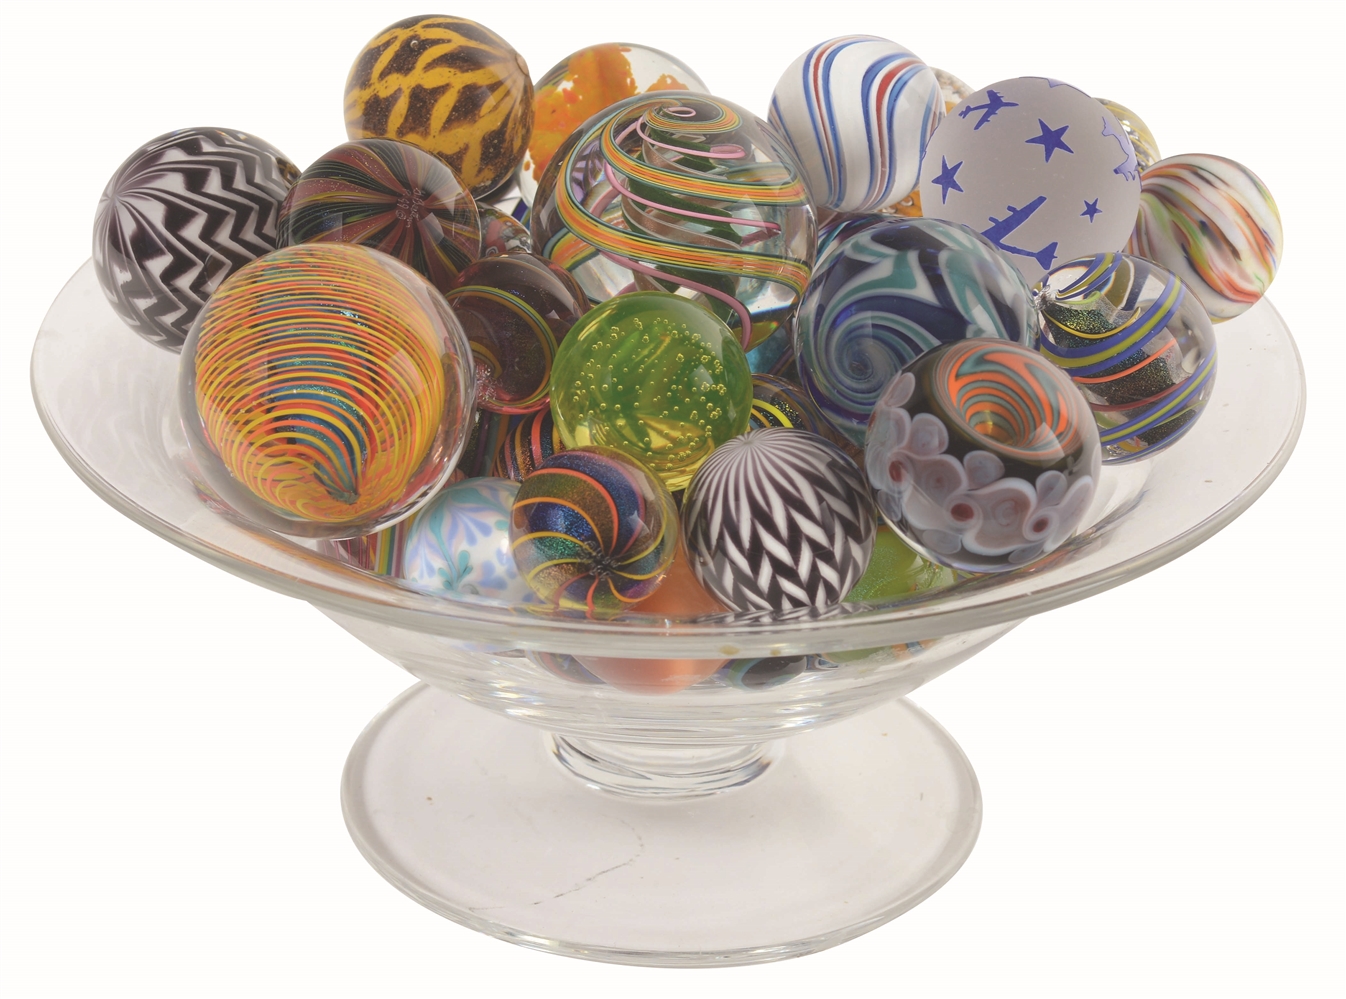 BOWL OF CONTEMPORARY MARBLES.